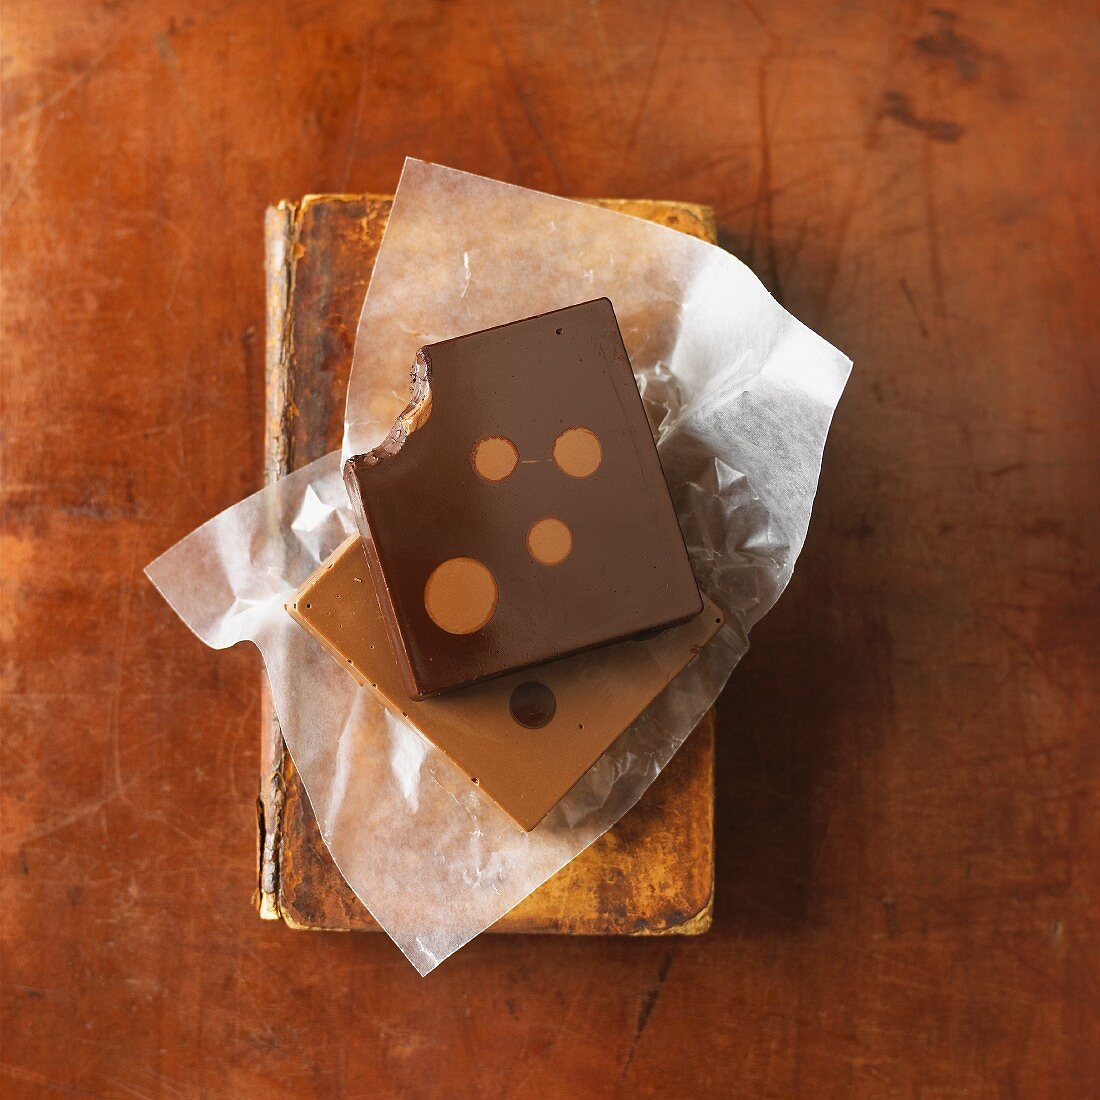 Polka dot chocolate with a bite taken out